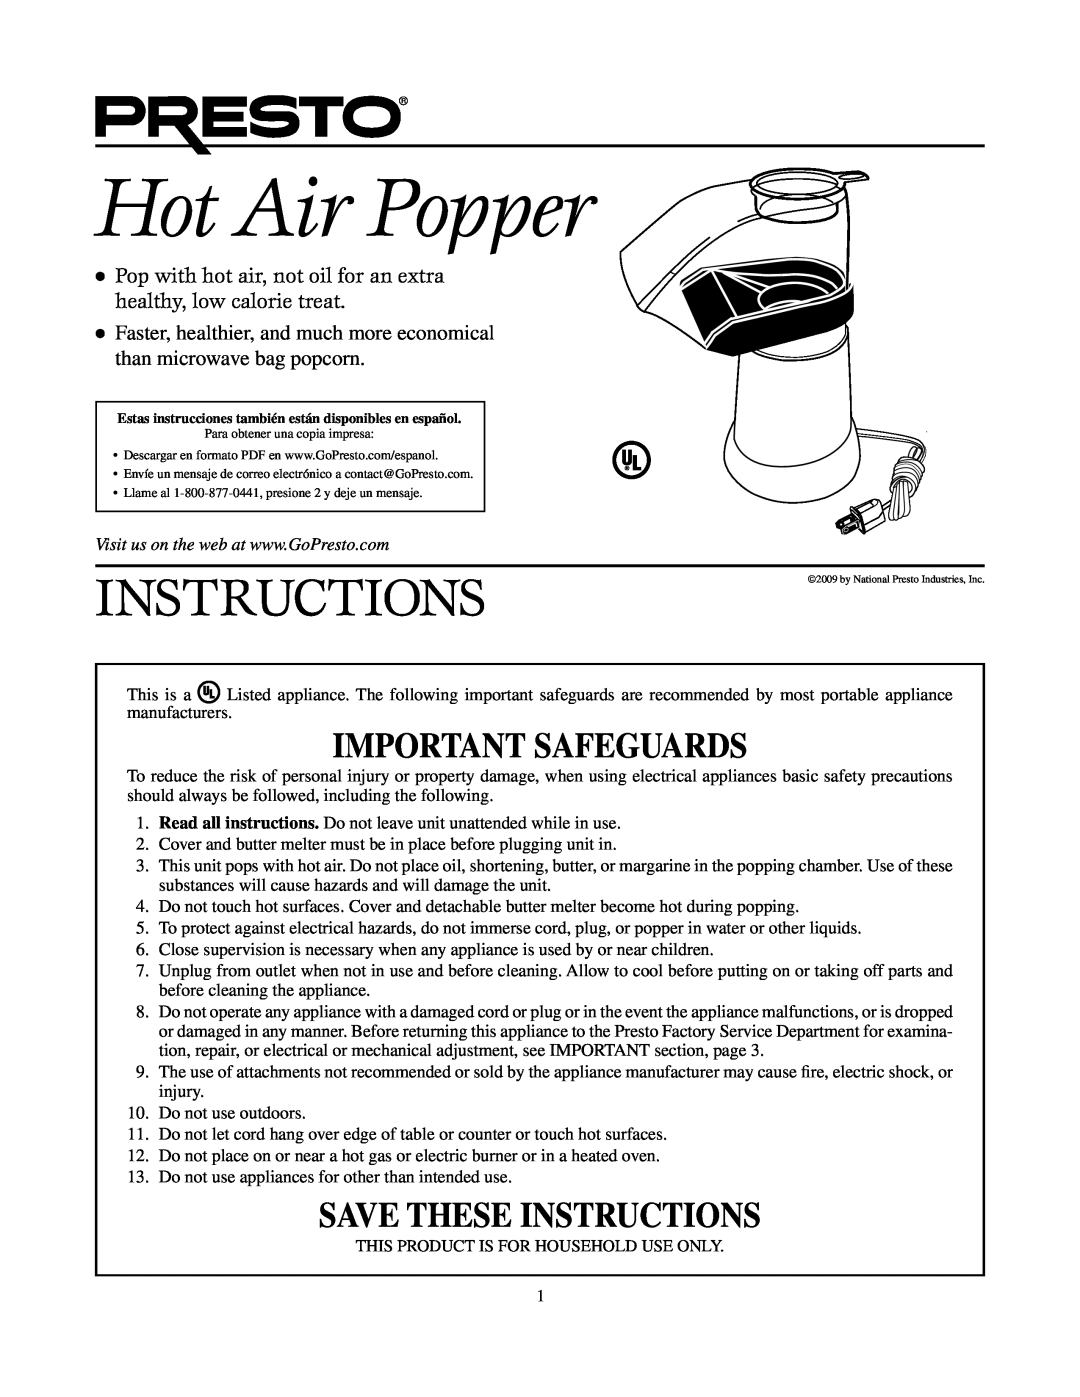 Presto Corn Popper manual Hot Air Popper, Important Safeguards, Save These Instructions 